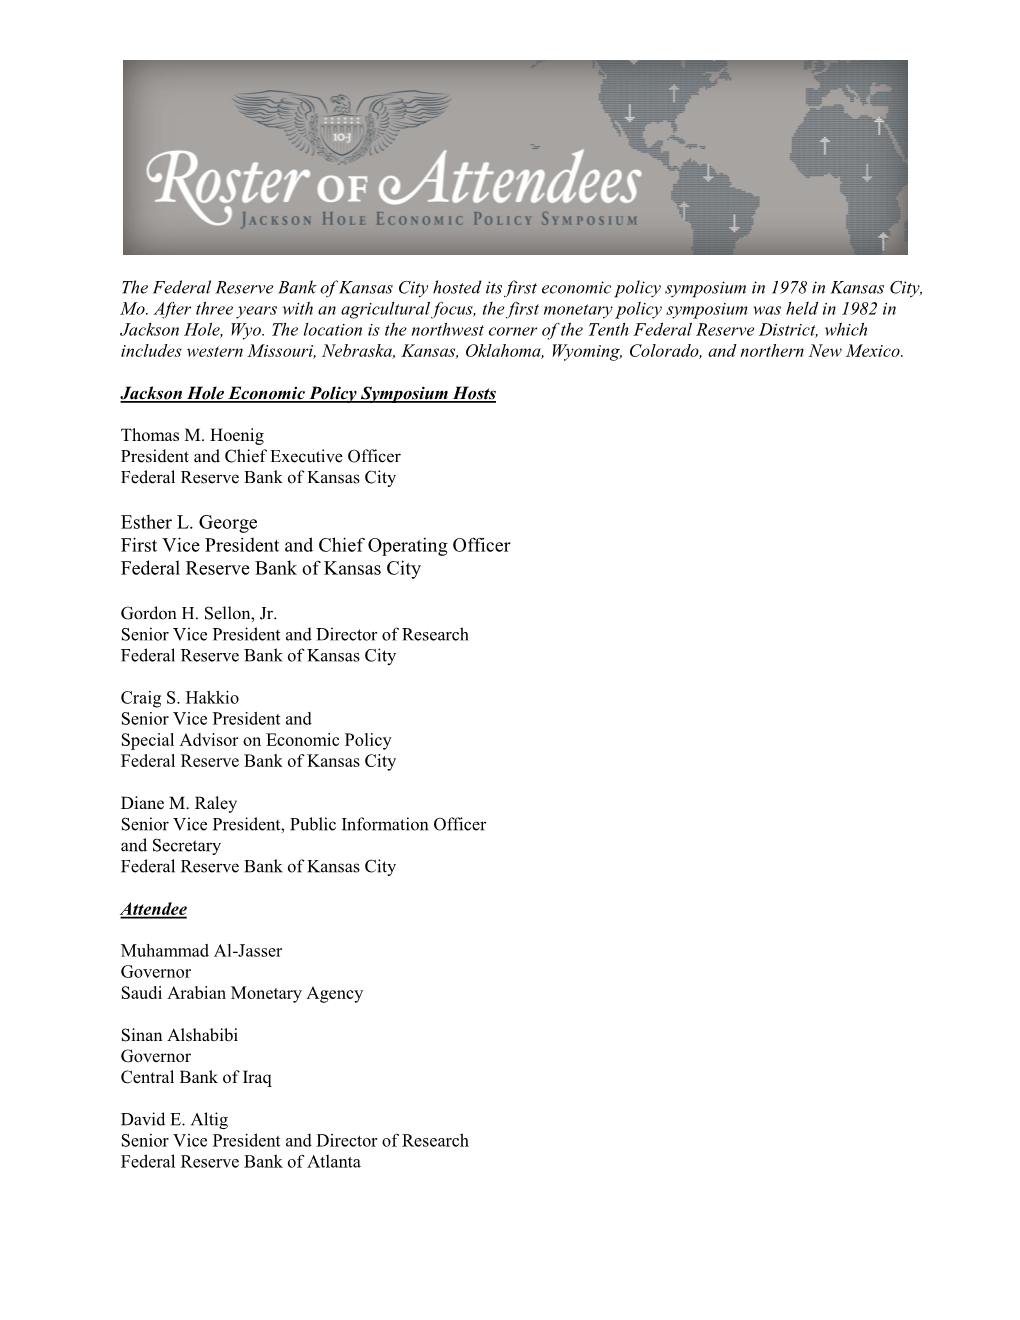 Roster of Attendees, Economic Symposium